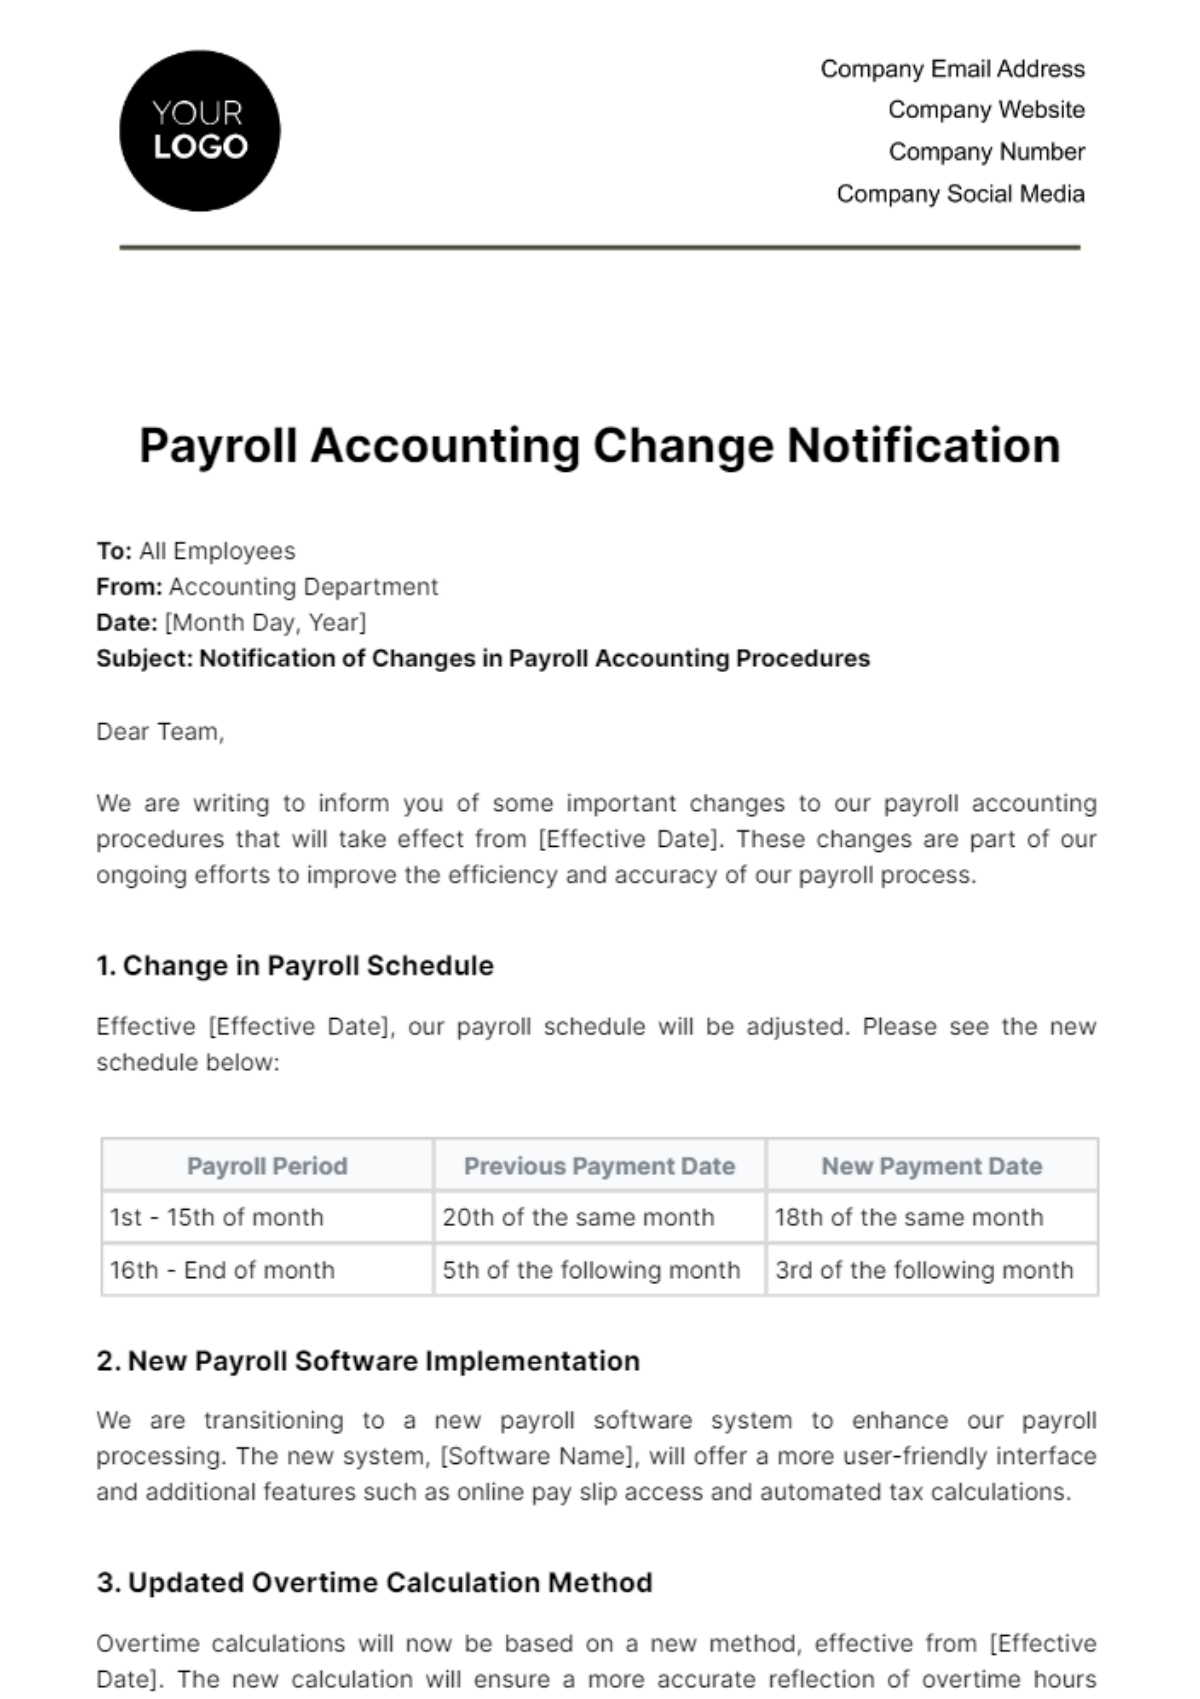 Payroll Accounting Change Notification Template